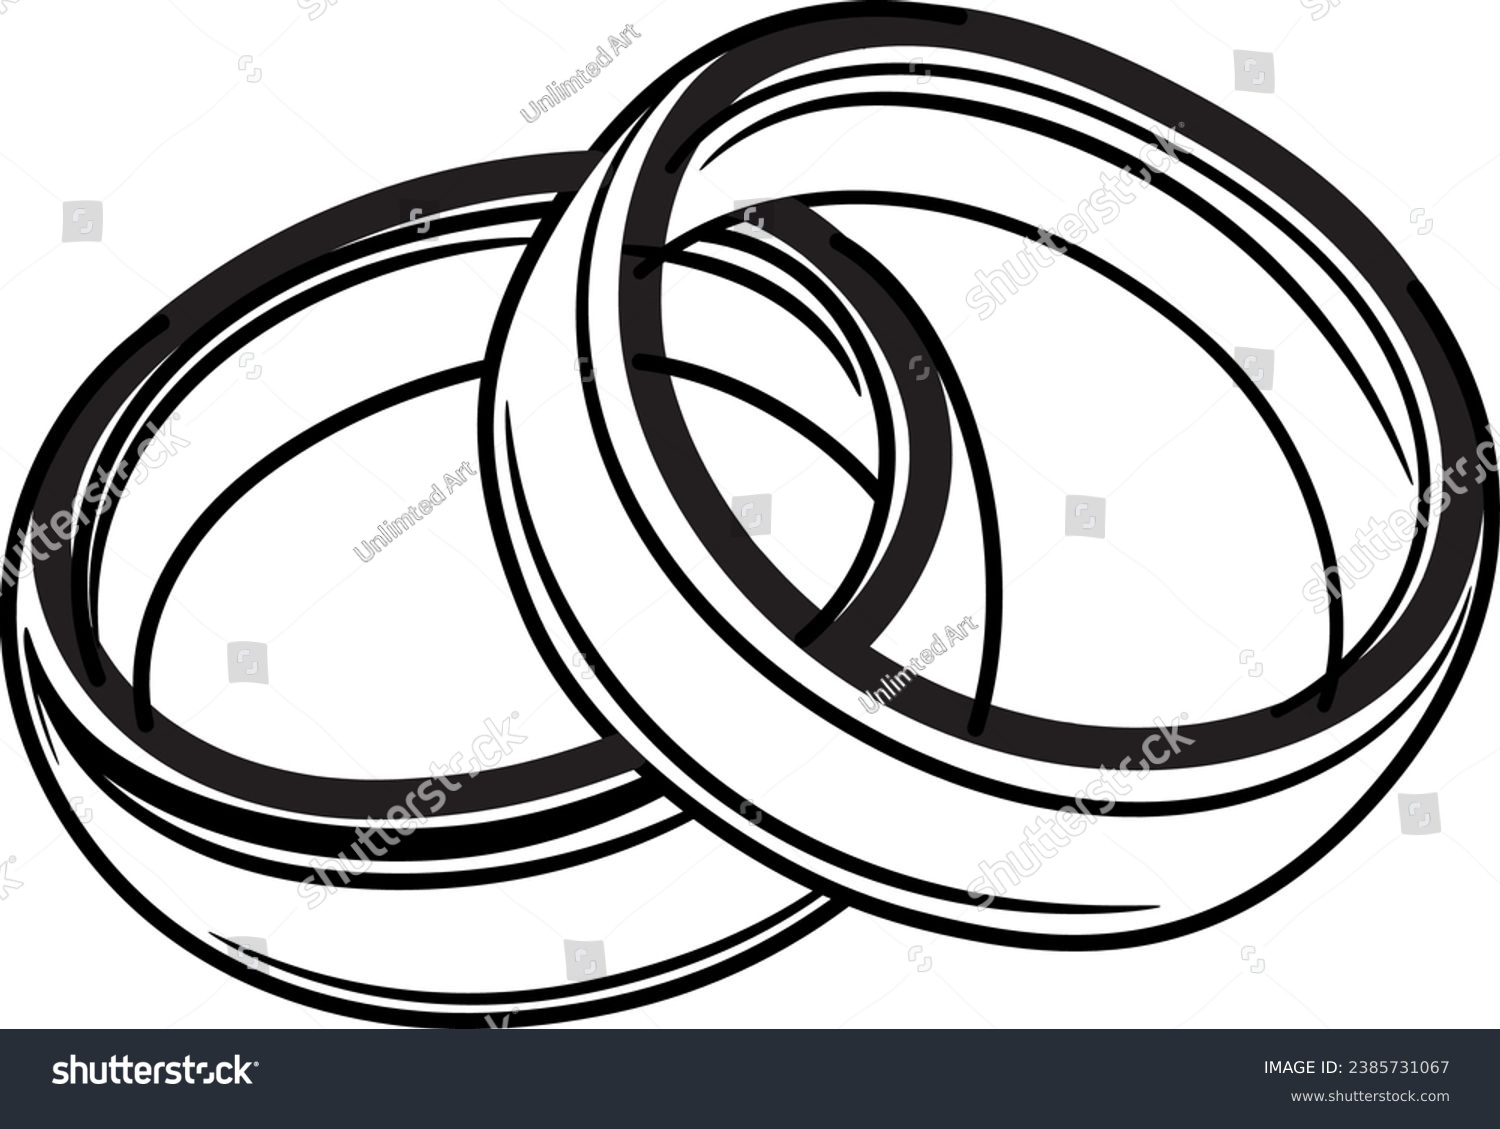 SVG of Black And White Marriage Rings For Couples svg